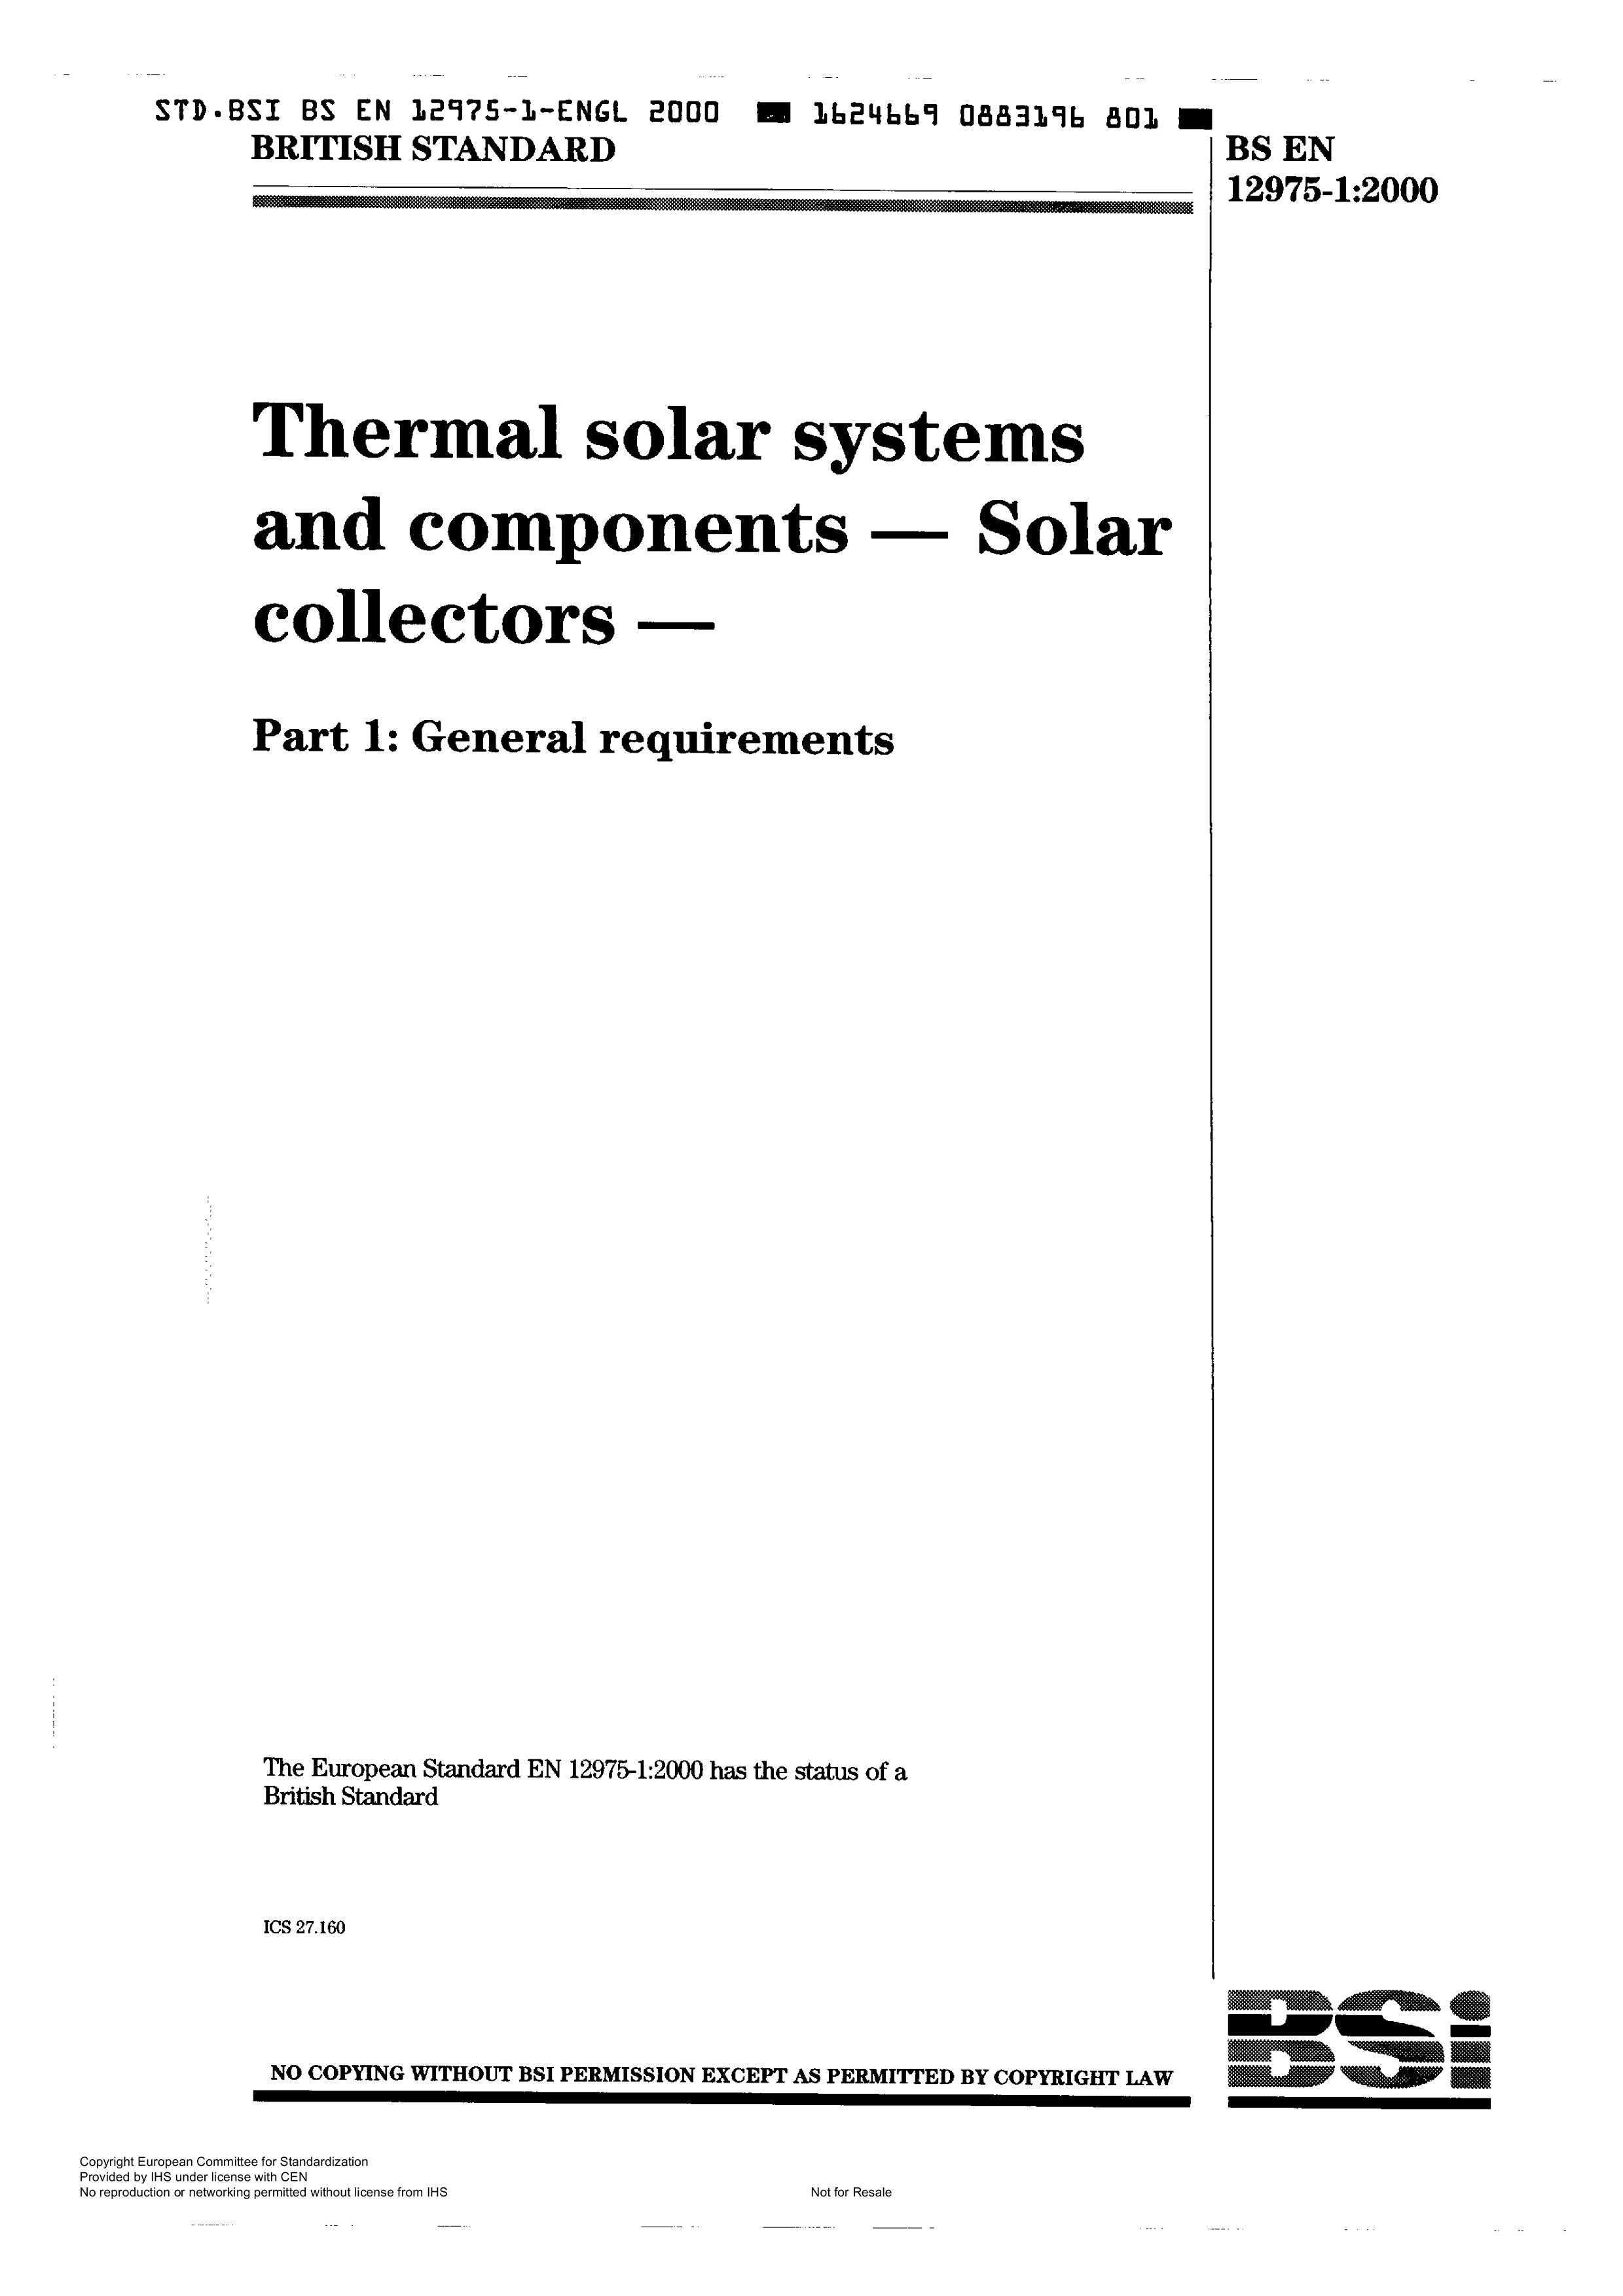 BS EN 12975-1-2000 Thermal solar systems and components-Solar collector.pdf1ҳ